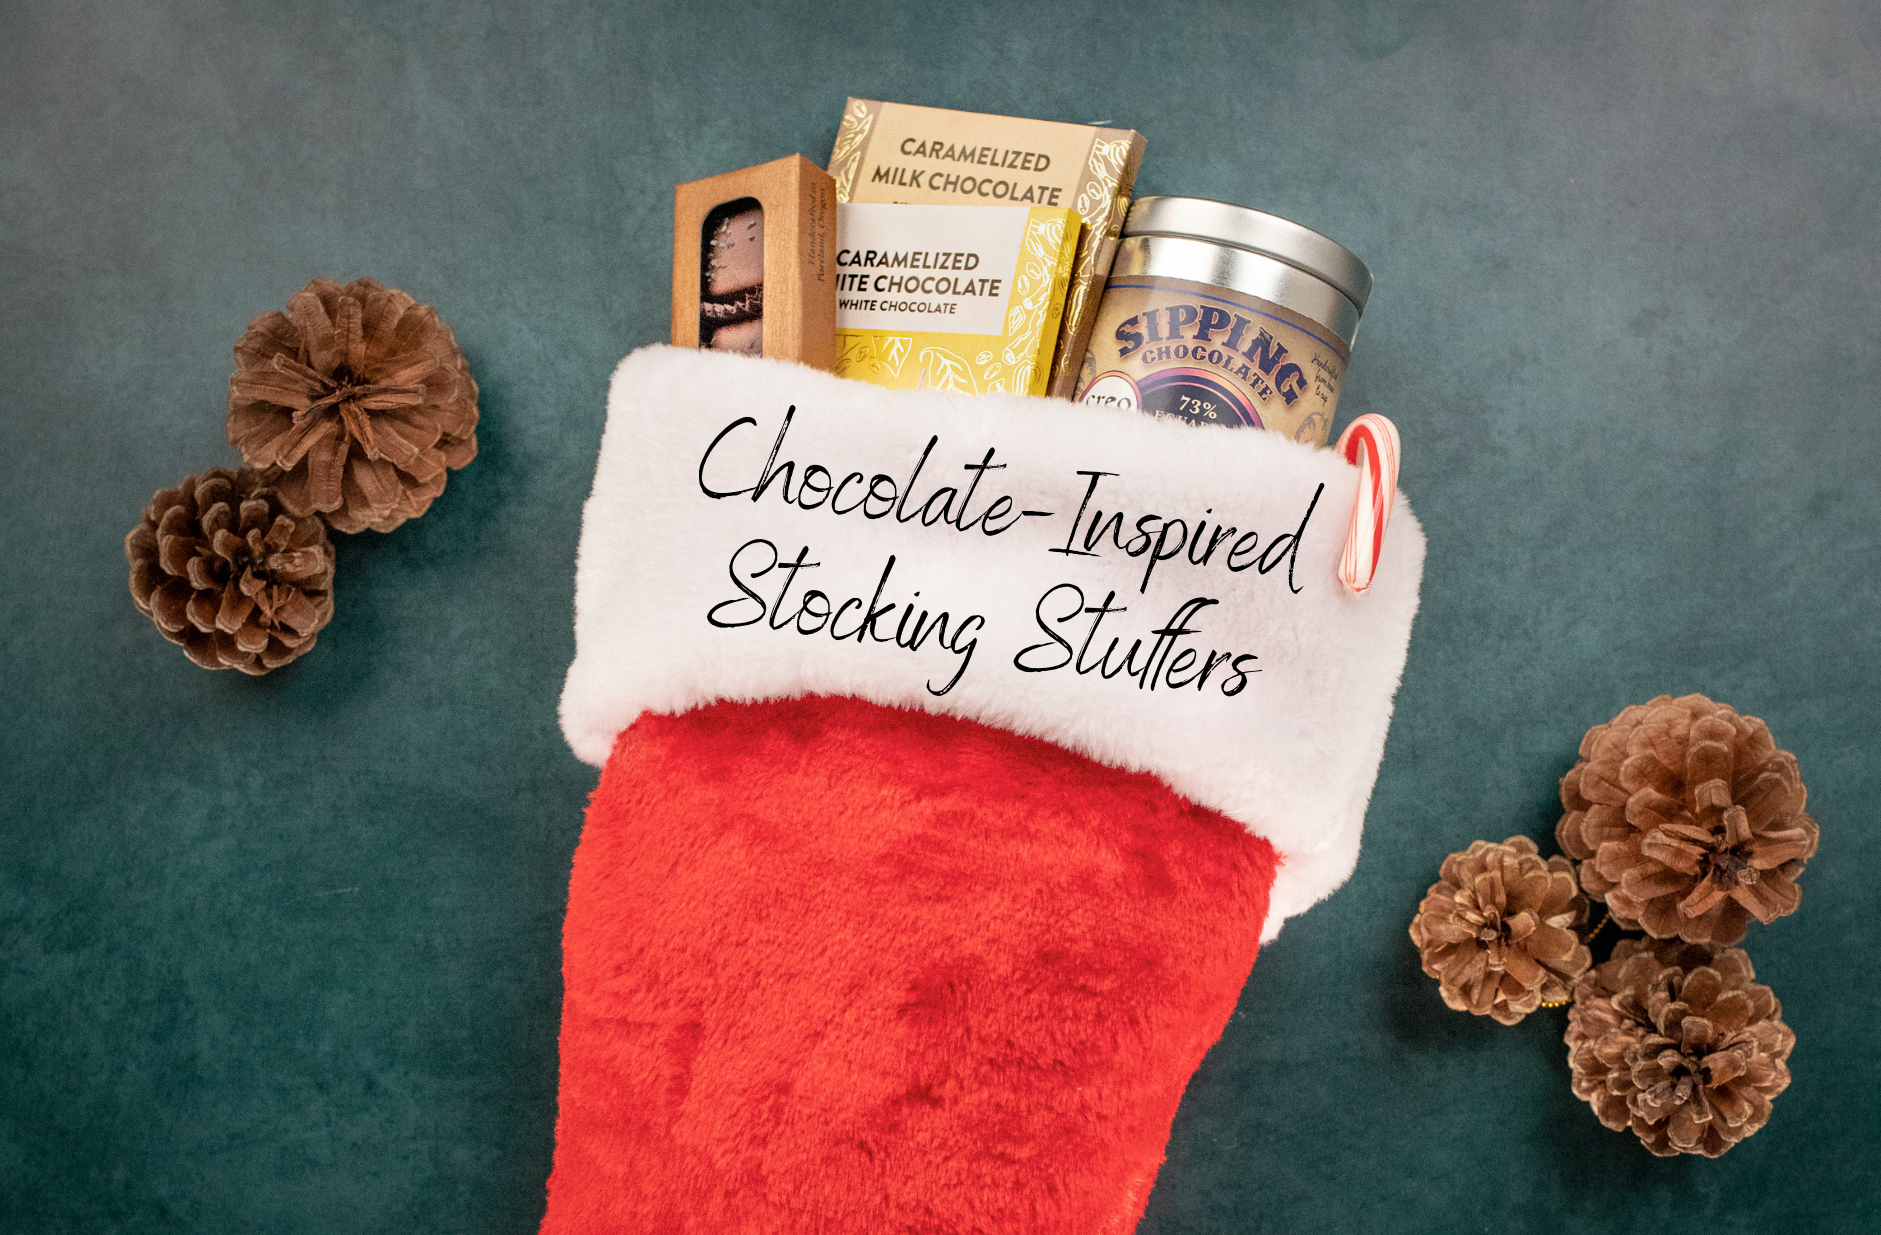 Stocking Stuffers Best Kitchen Christmas Gifts 2022, Gift Guides